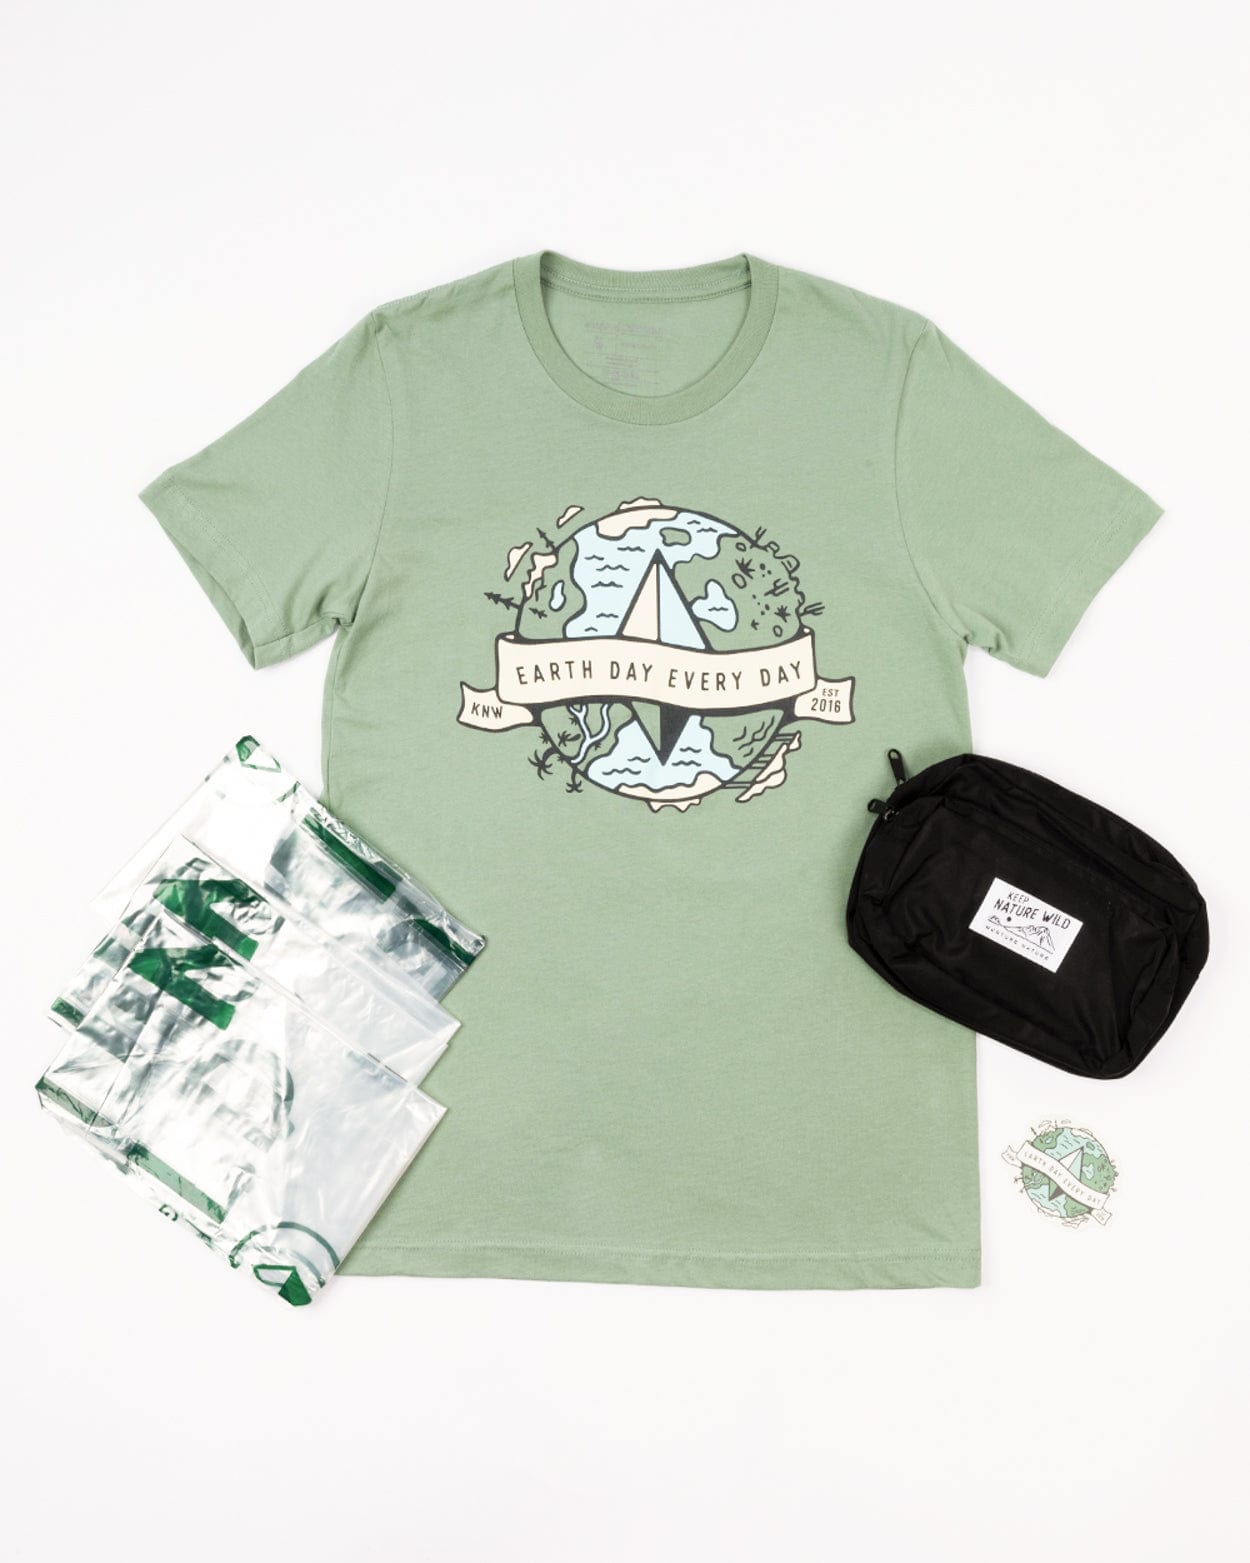 Keep Nature Wild XS / Sage Ltd. Edition Earth Day Every Day Bundle